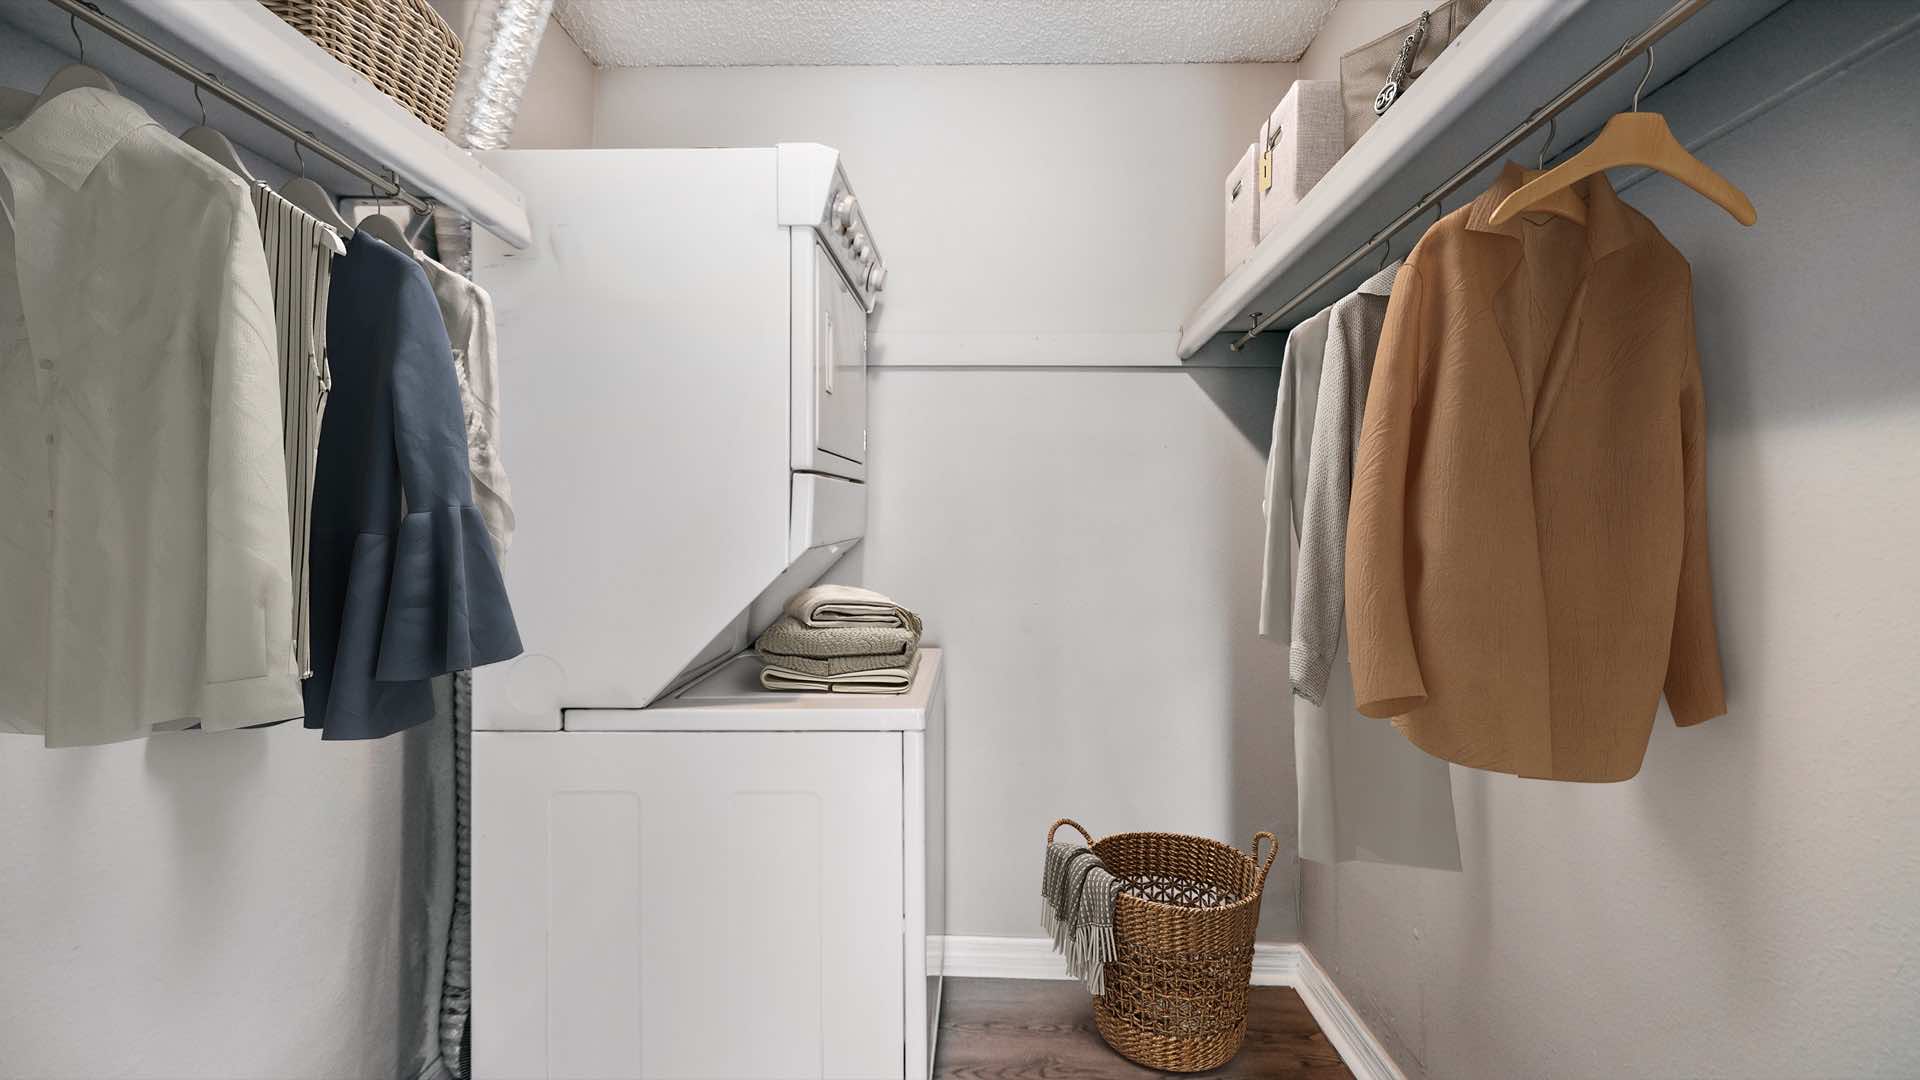 spacious walk-in closet with clothes hanging and stacked washer and dryer unit